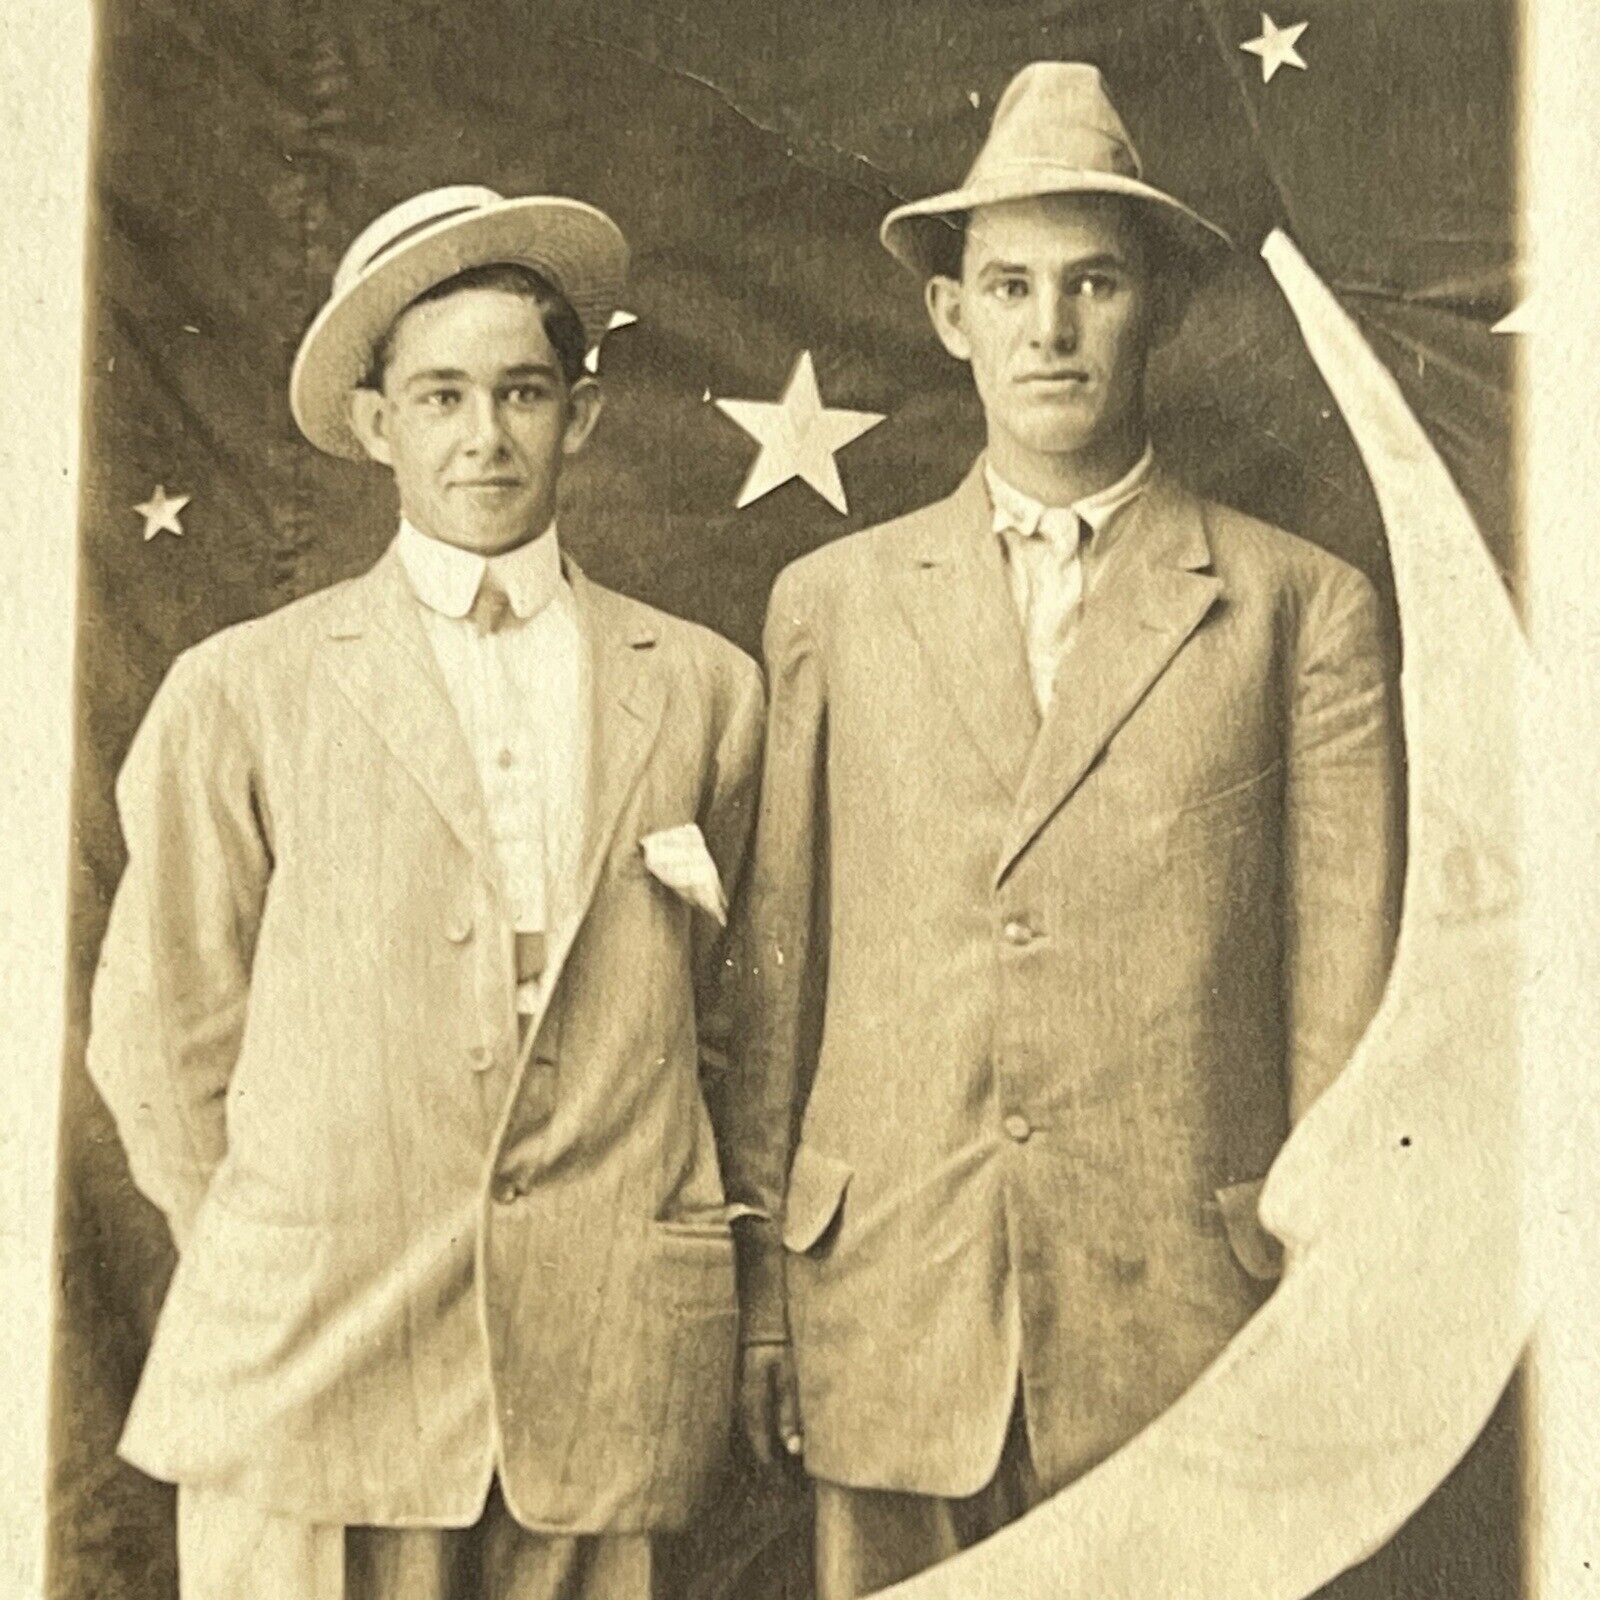 Antique RPPC Real Postcard Photograph Handsome Young Men Paper Moon Stars ID